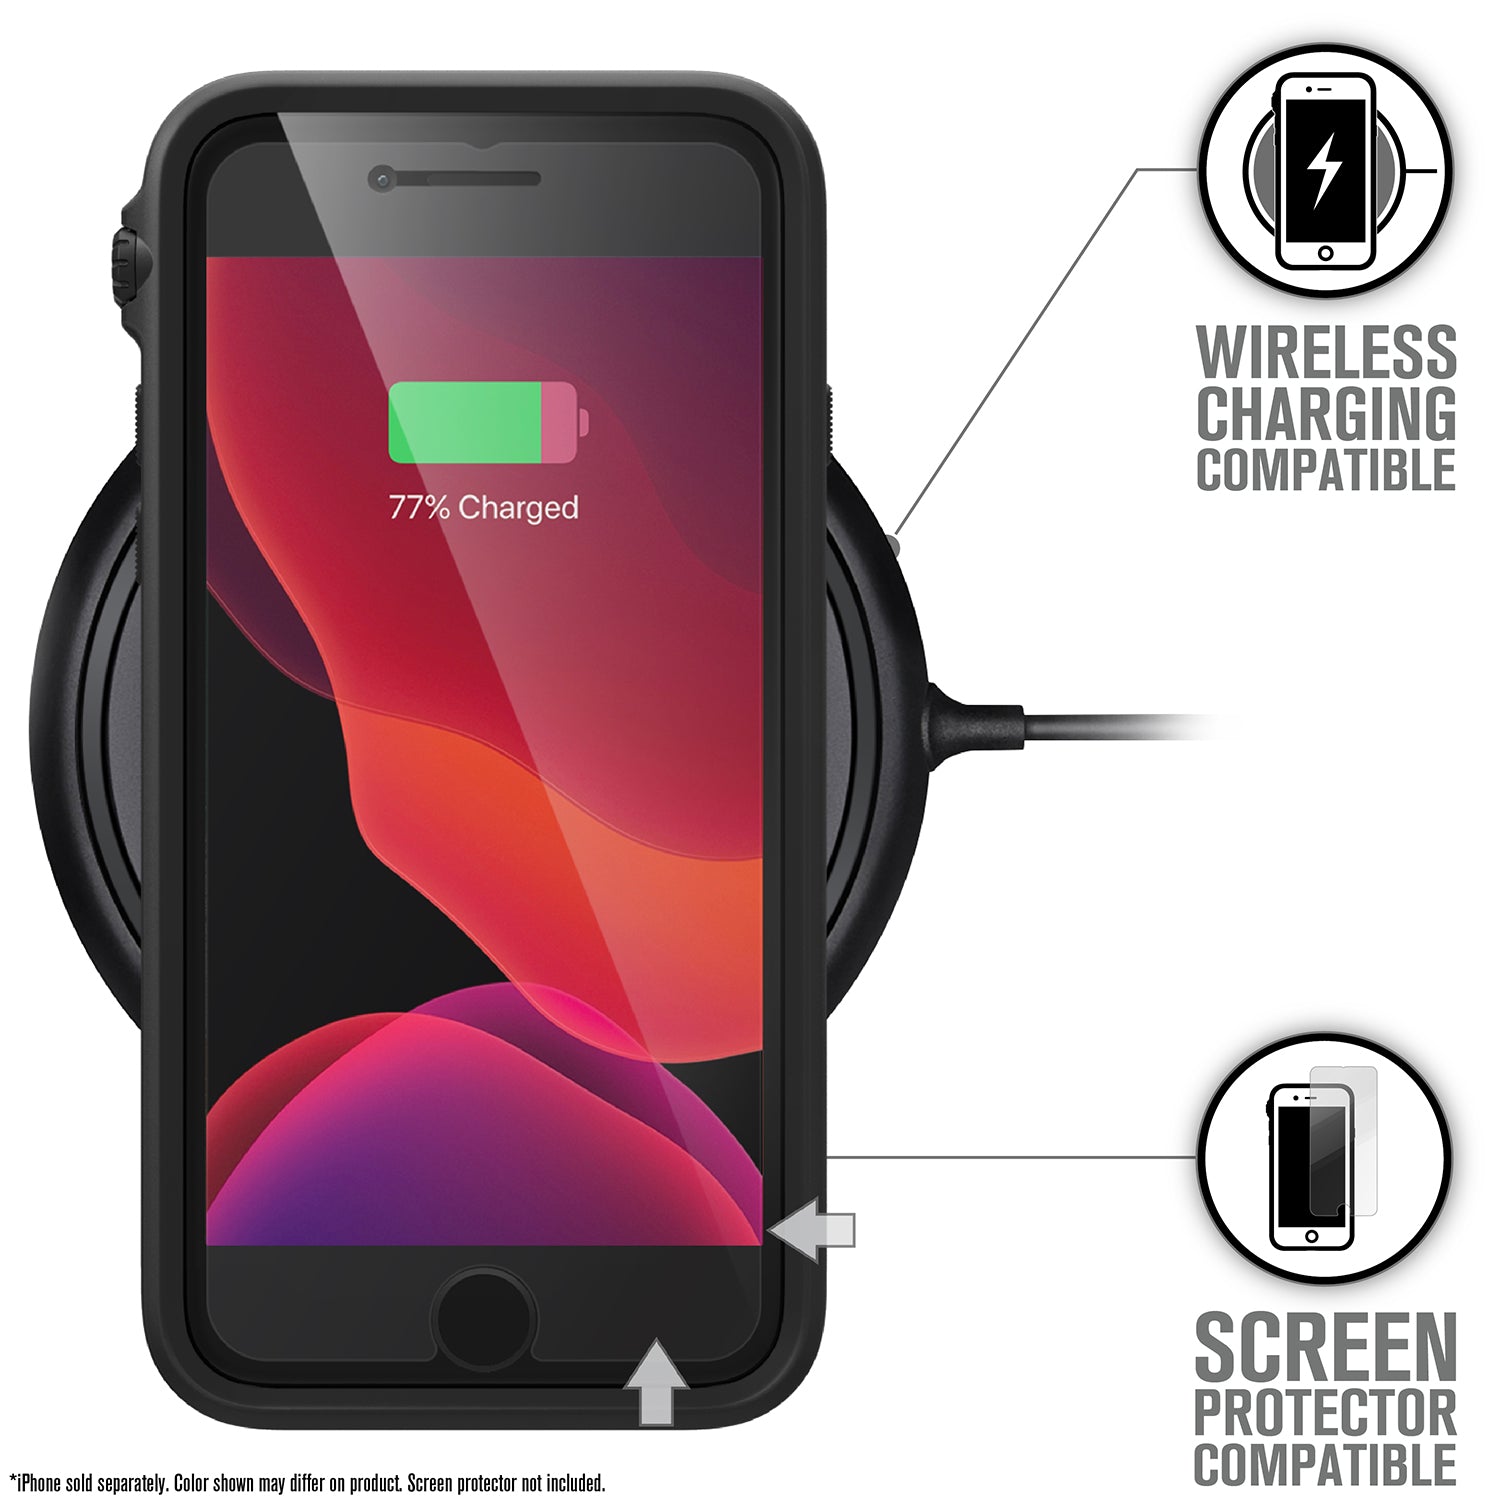 Catalyst iphone 8/7 impact protection case showing wireless charging in a stealth black colorway text reads wireless charging compatible screen protector compatible